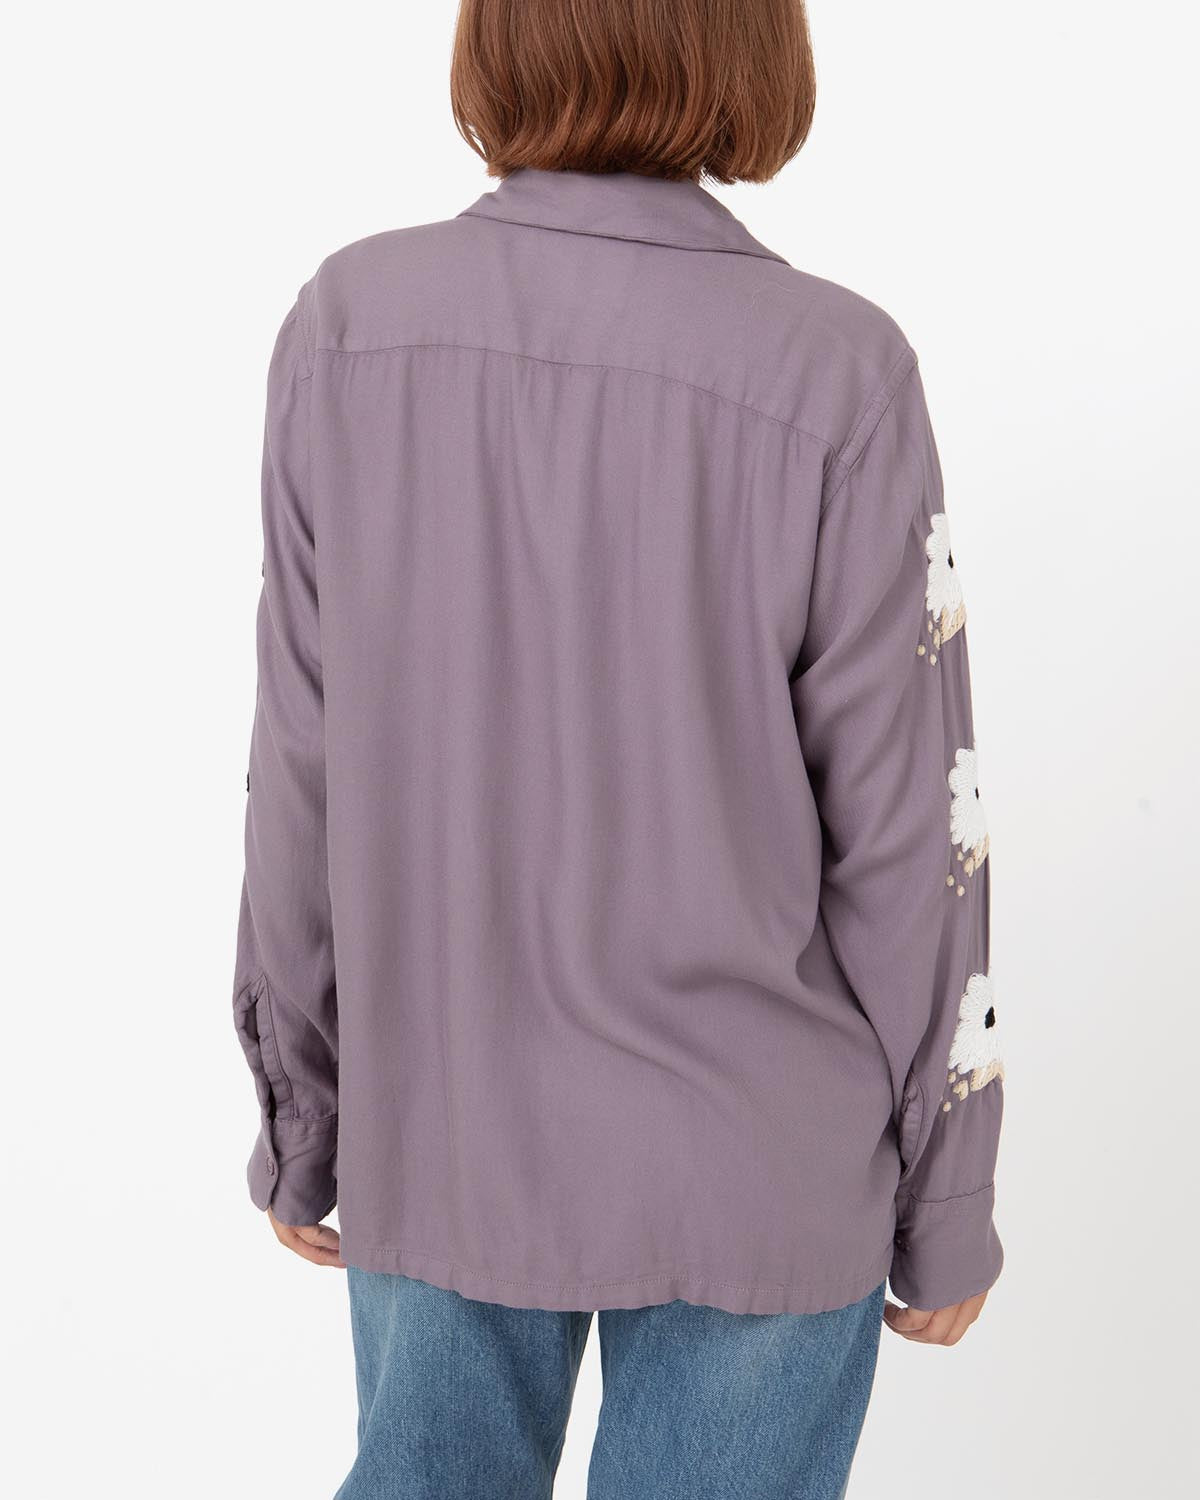 FLOWER & PAISLEY HAND EMBROIDERY SHIRT – COVERCHORD